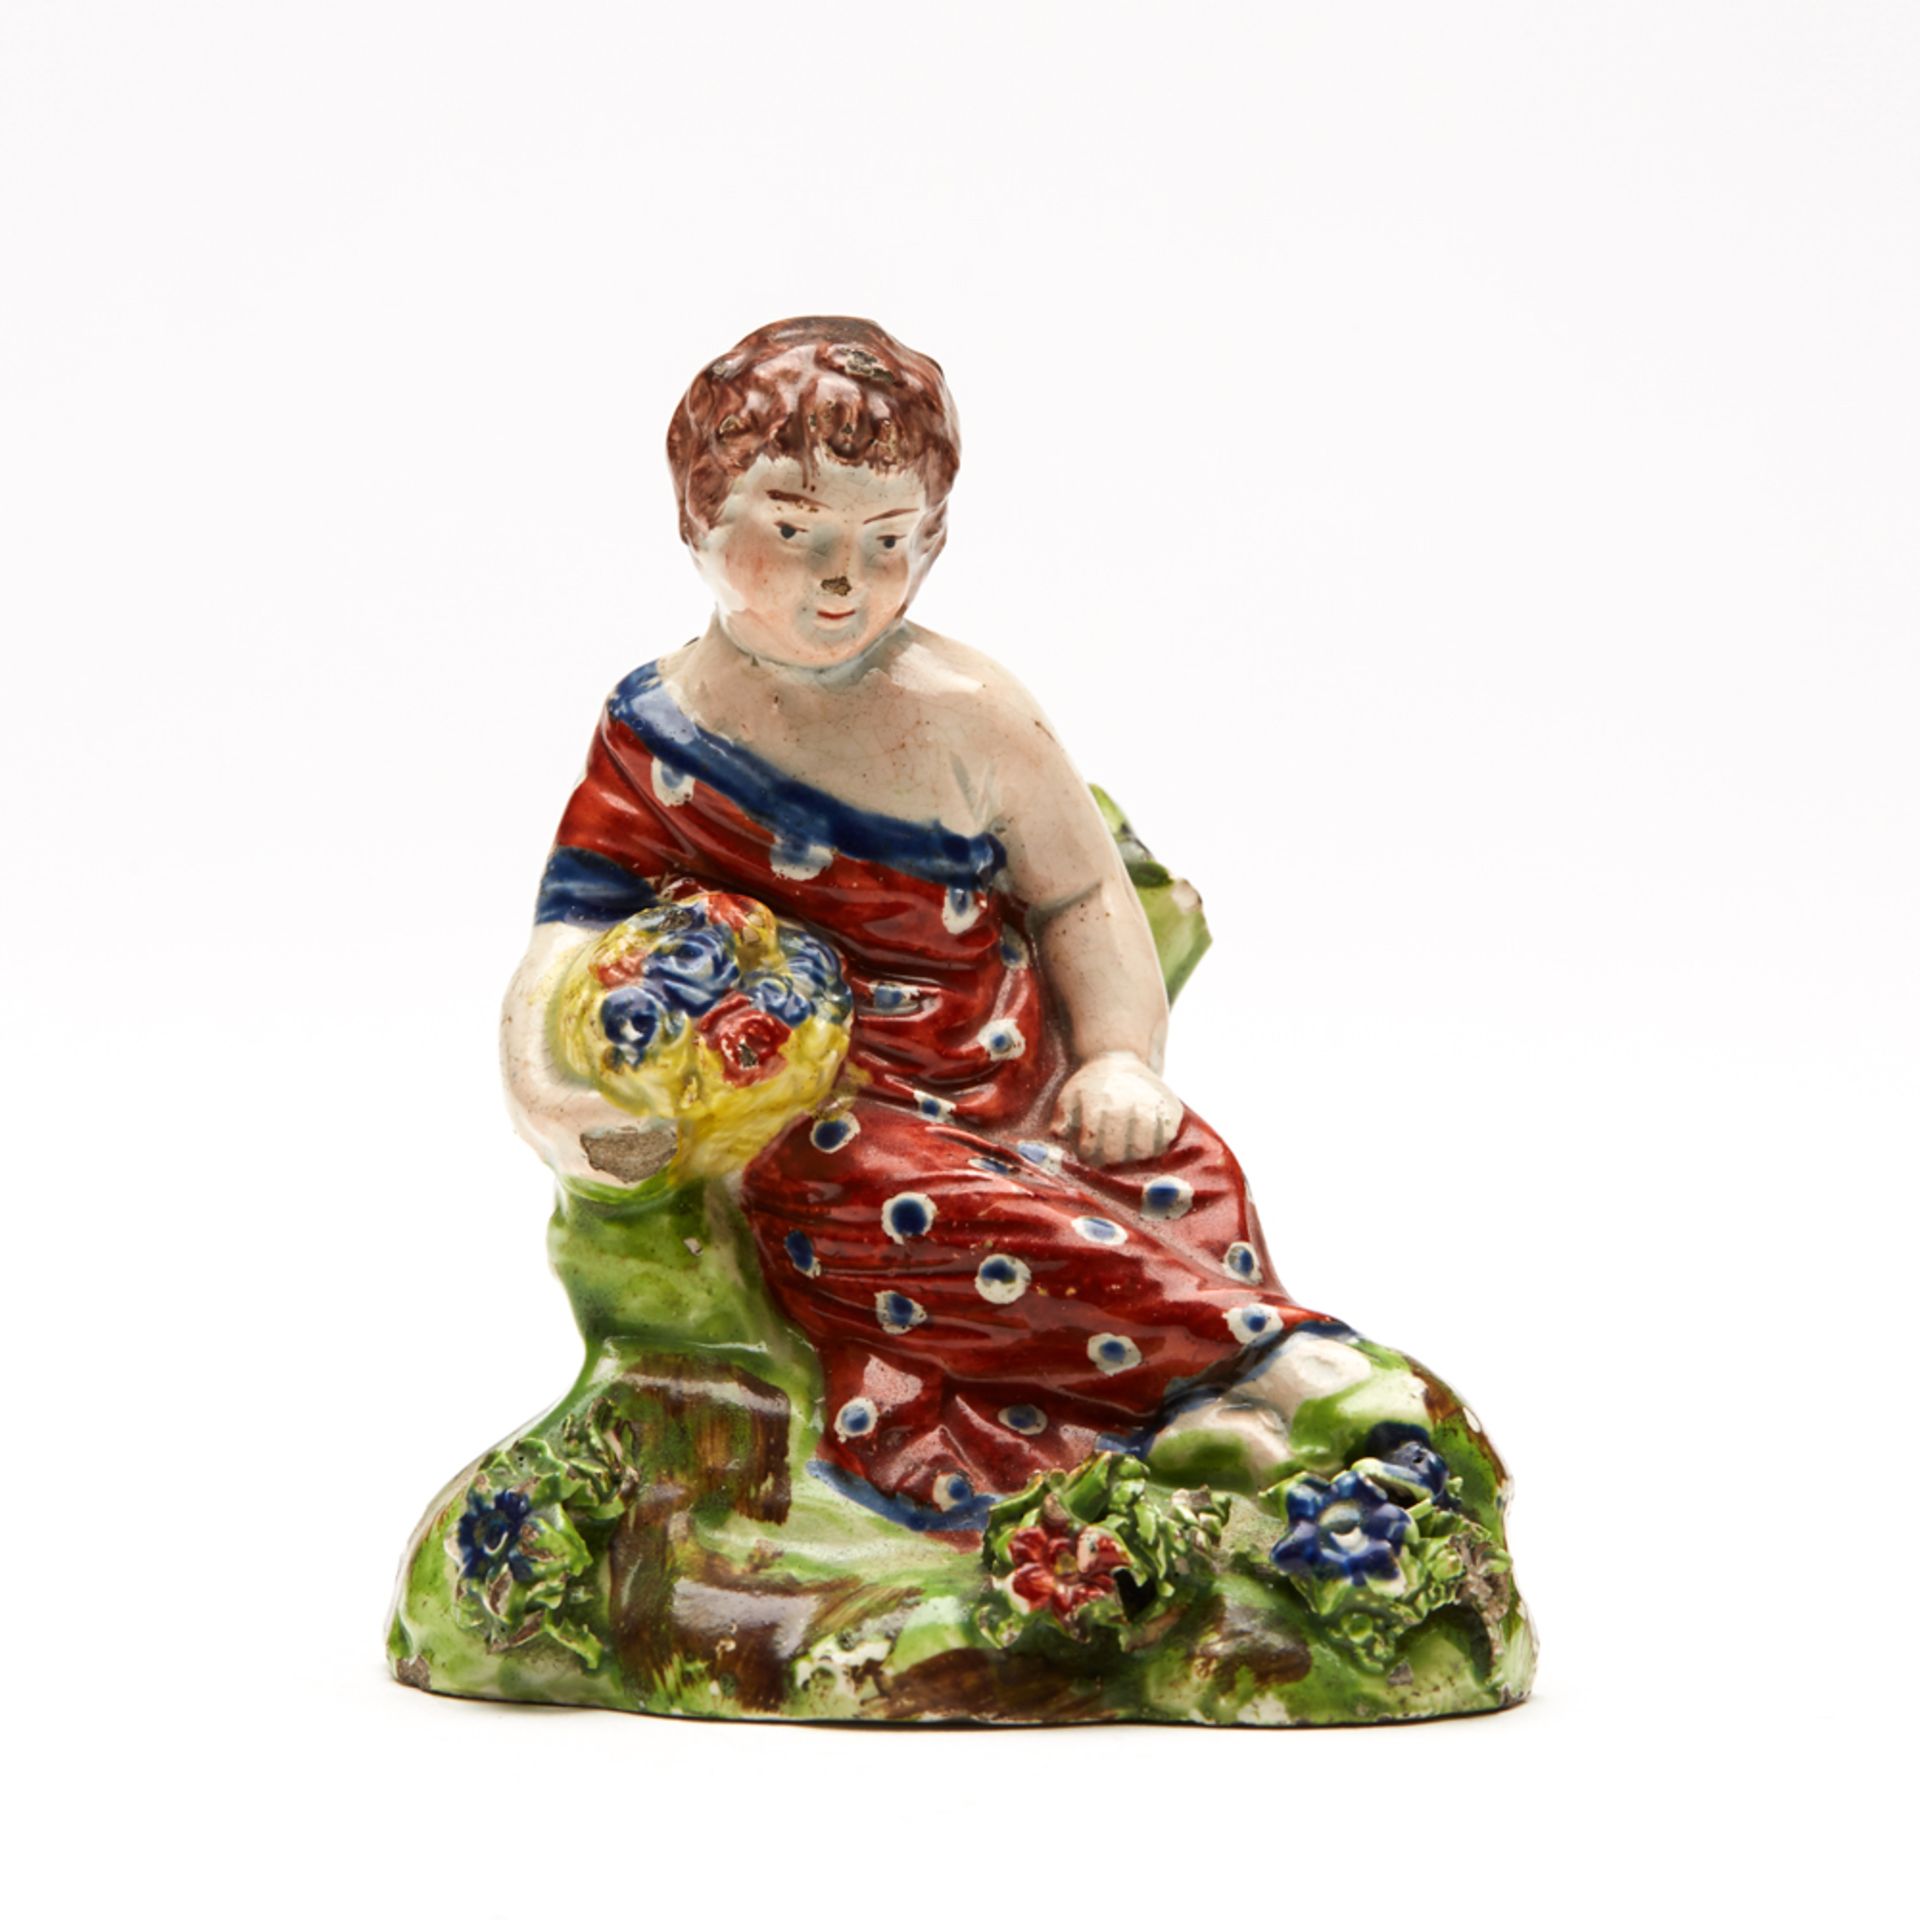 Antique Staffordshire Pearlware Seated Girl Figure C.1800